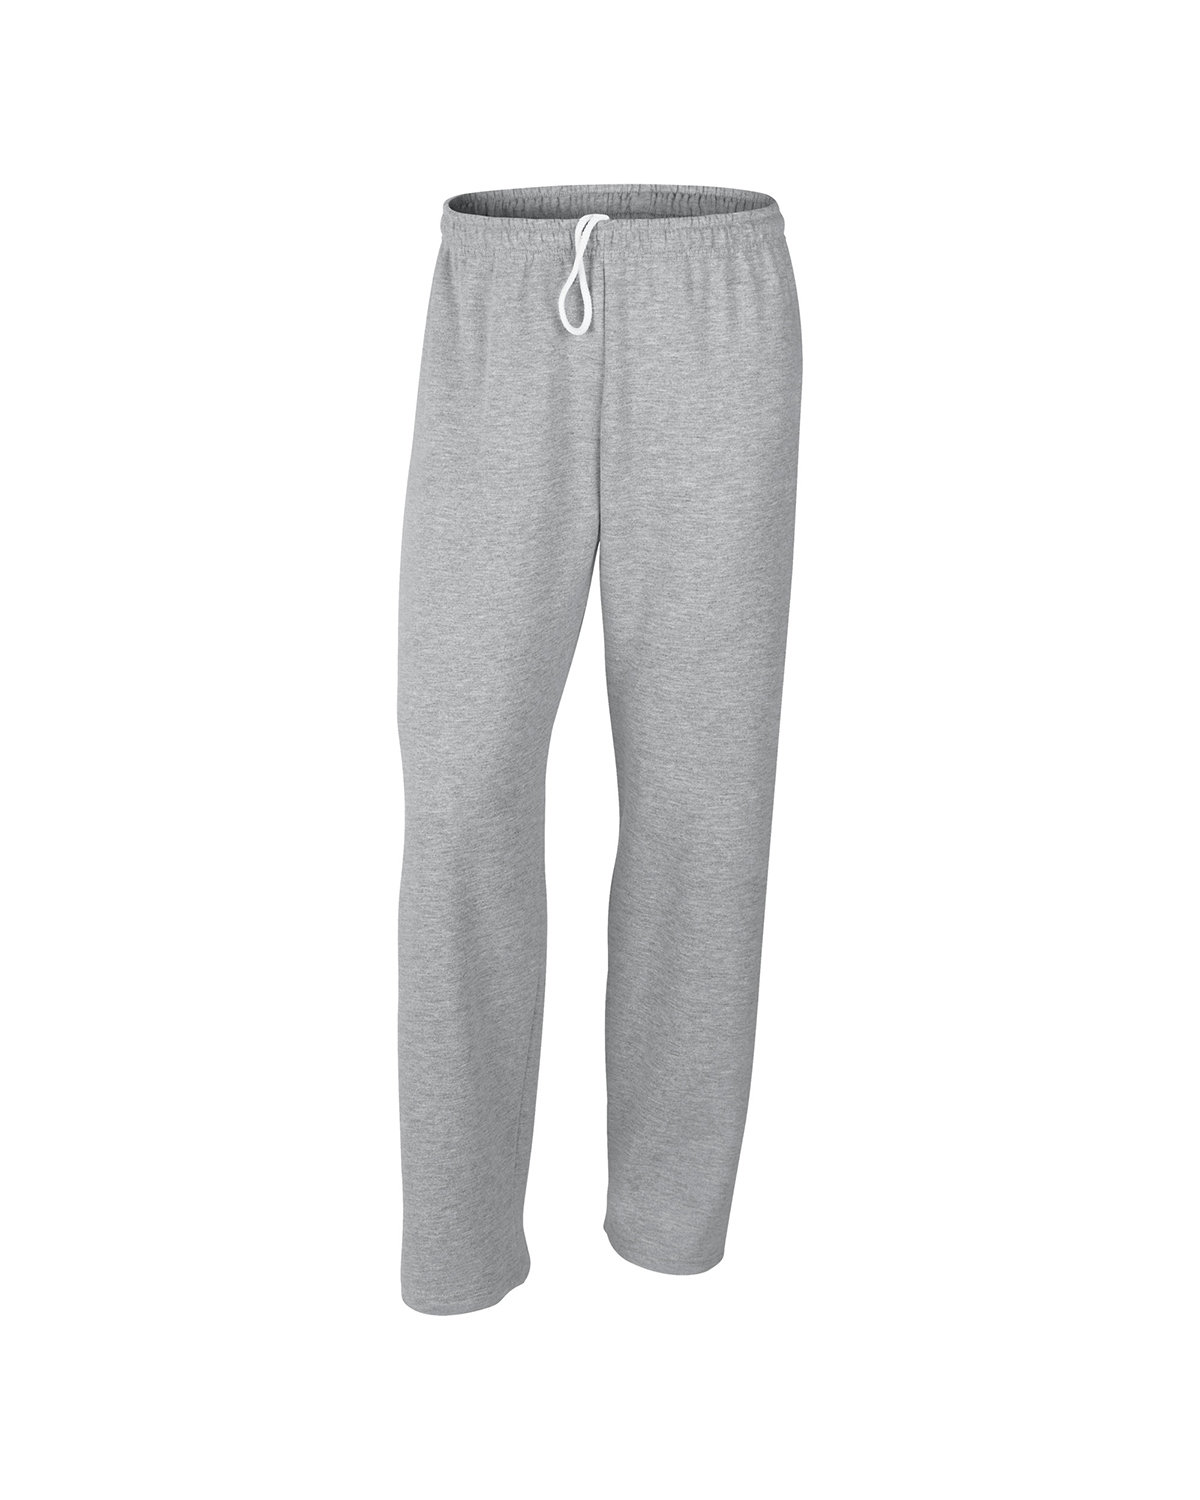 Gildan Heavy Blend Adult Sweatpants with Cuff - PurpleApple Clothing Limited